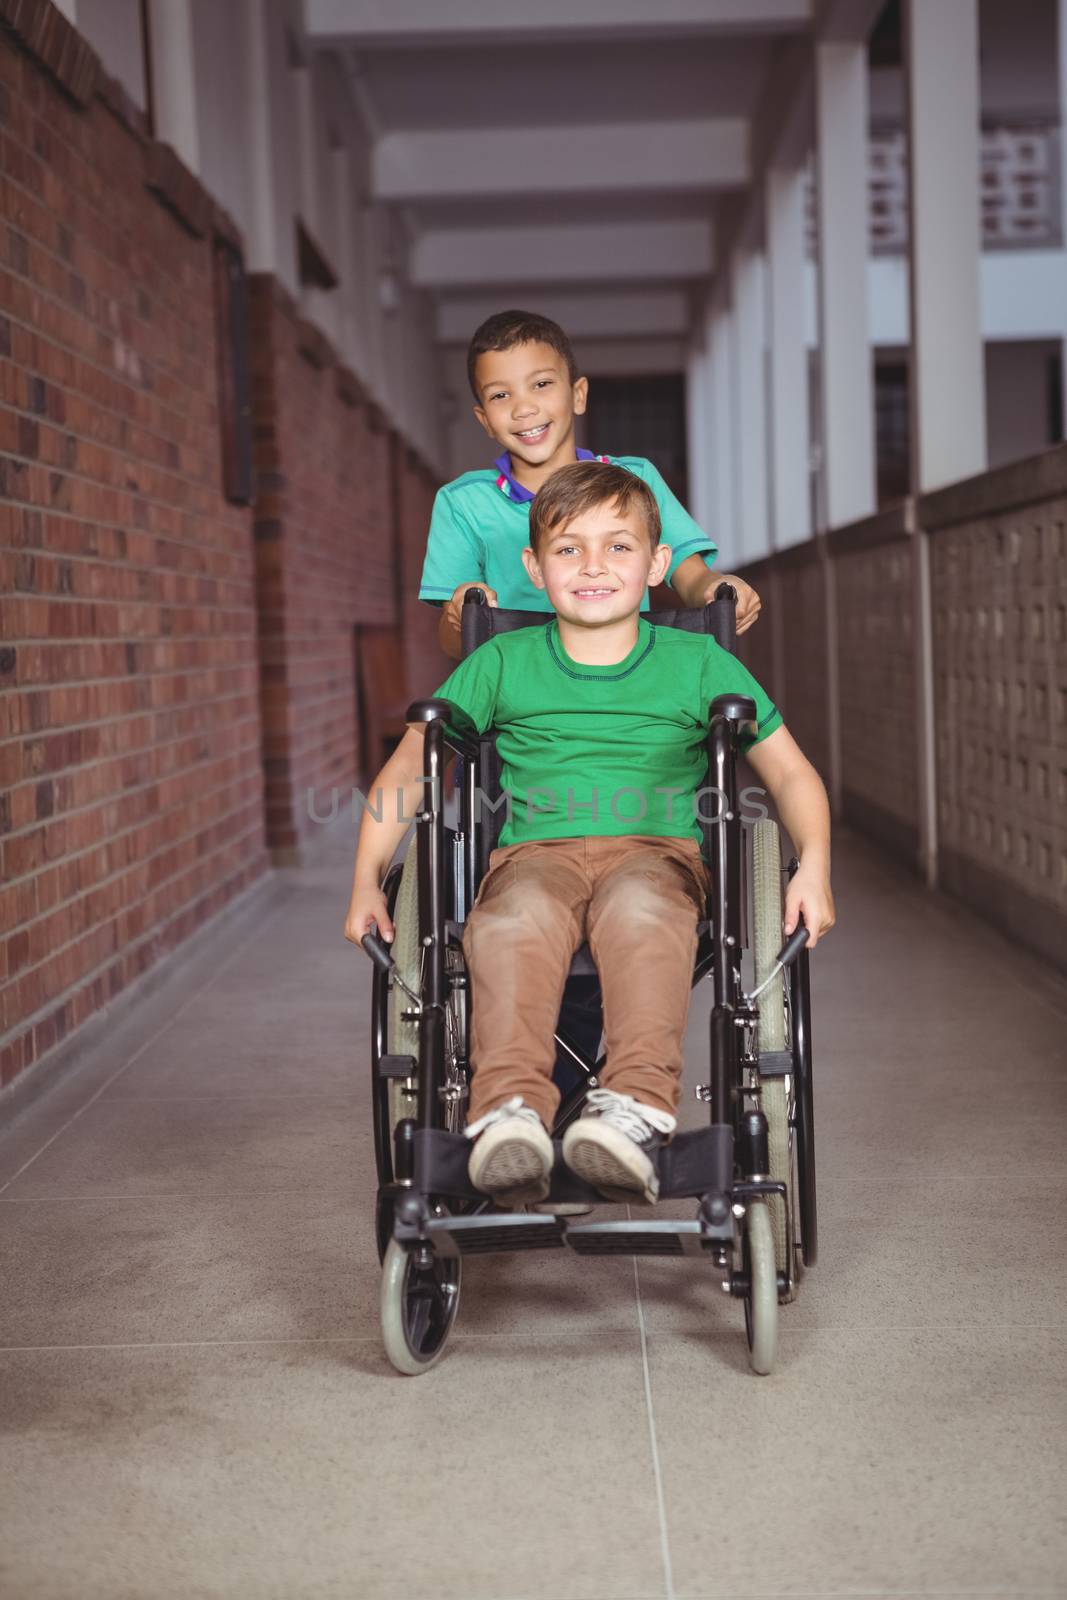 Smiling student in a wheelchair and friend pushing by Wavebreakmedia